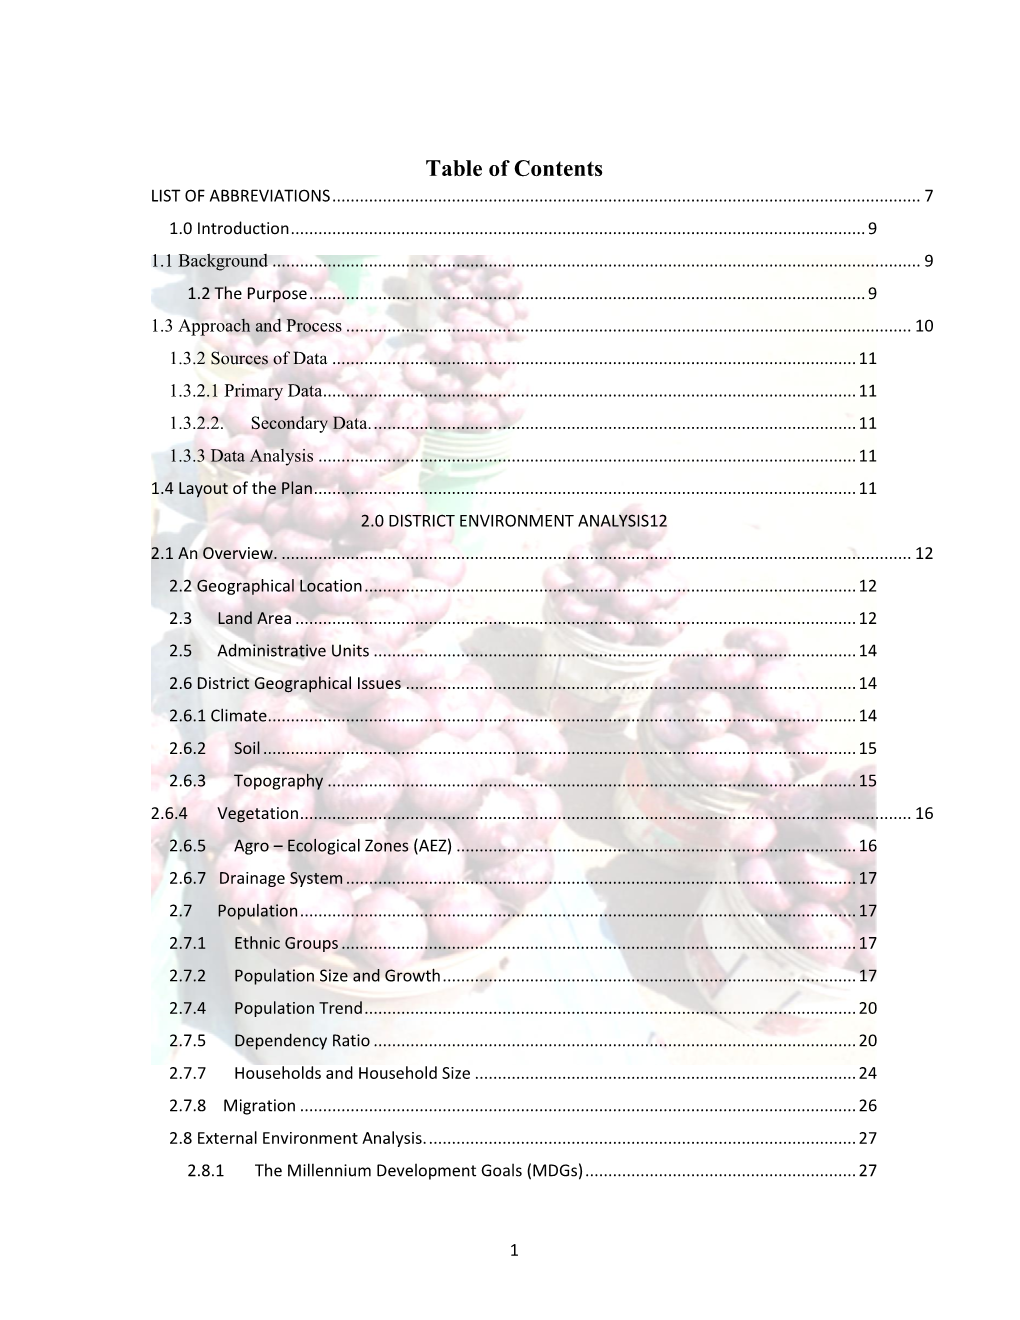 Table of Contents LIST of ABBREVIATIONS